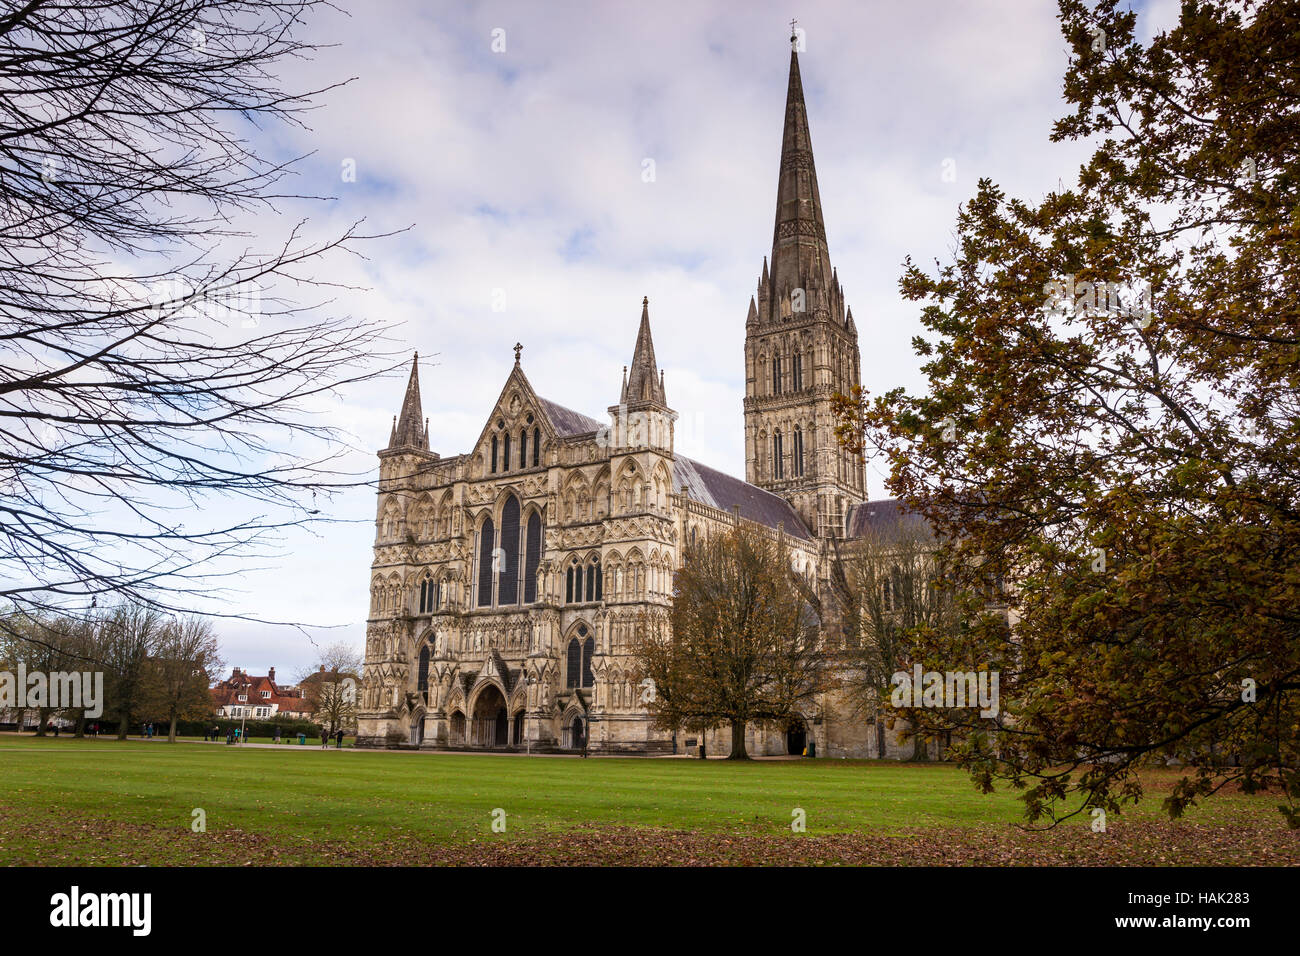 Salisbury cathedral in Wiltshire, England. Stock Photo